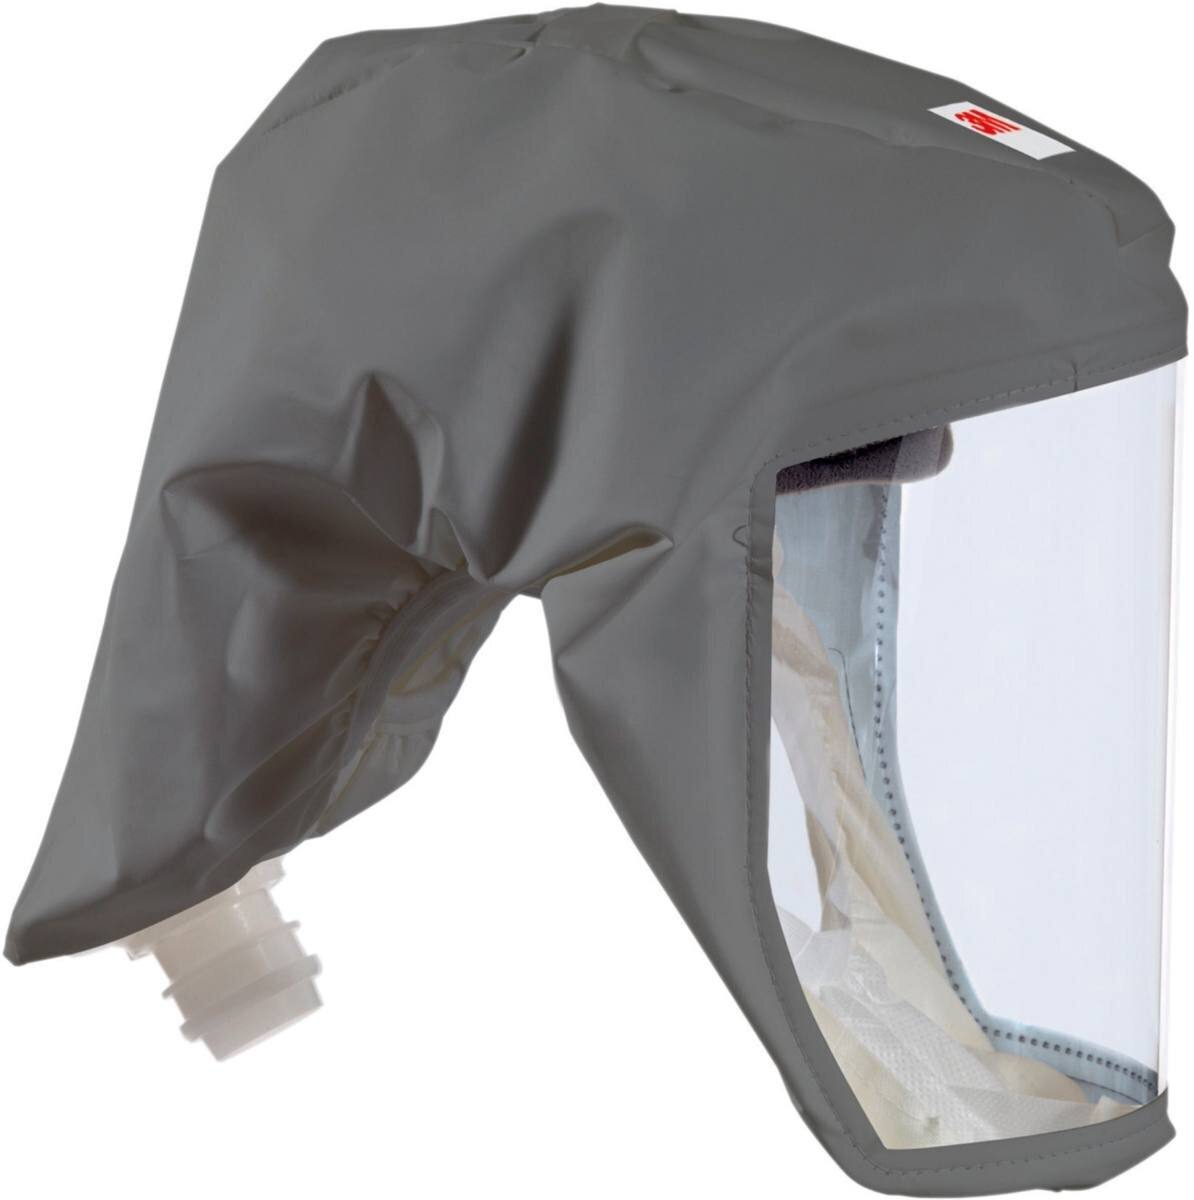 3M Speedglas Versaflo disposable lightweight hood S333S, with integrated head holder, size S/M with Adflo blower respirator with QRS air hose, adapter, air flow meter, pre-filter, spark arrester, particle filter, lithium-ion battery and charger